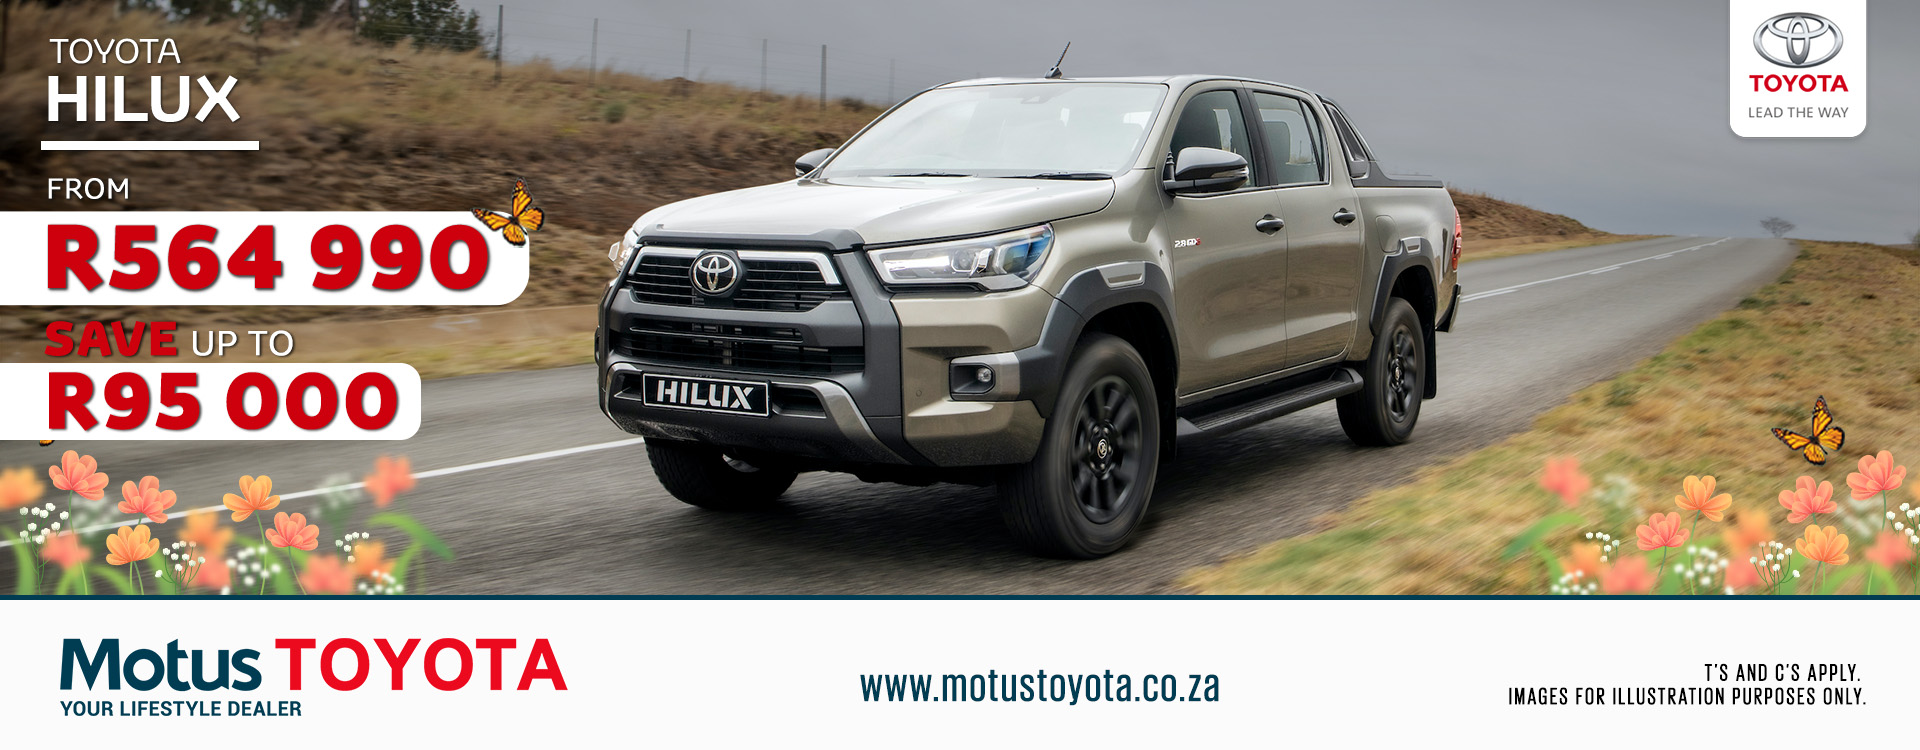 Toyota Hilux banner